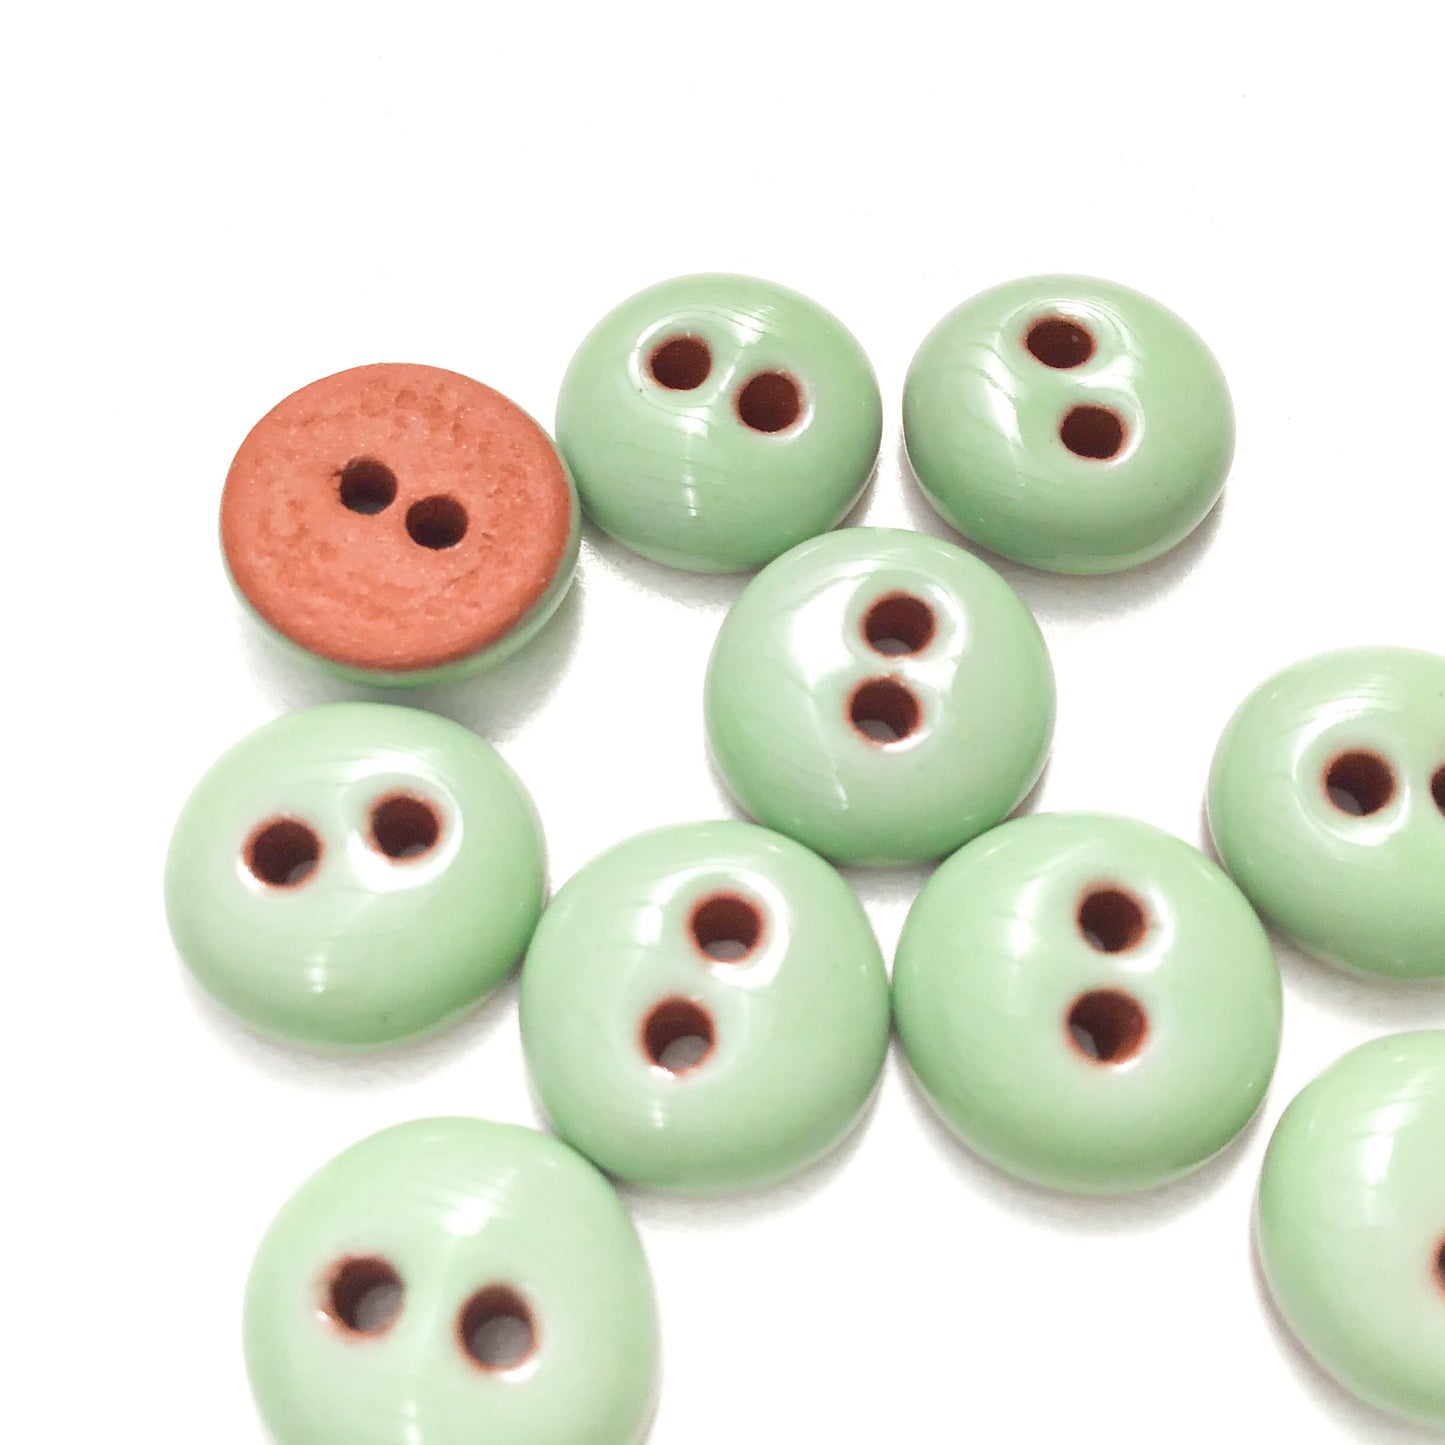 Mint Green Ceramic Buttons - Hand Made Clay Buttons - 1/2" - 10 Pack